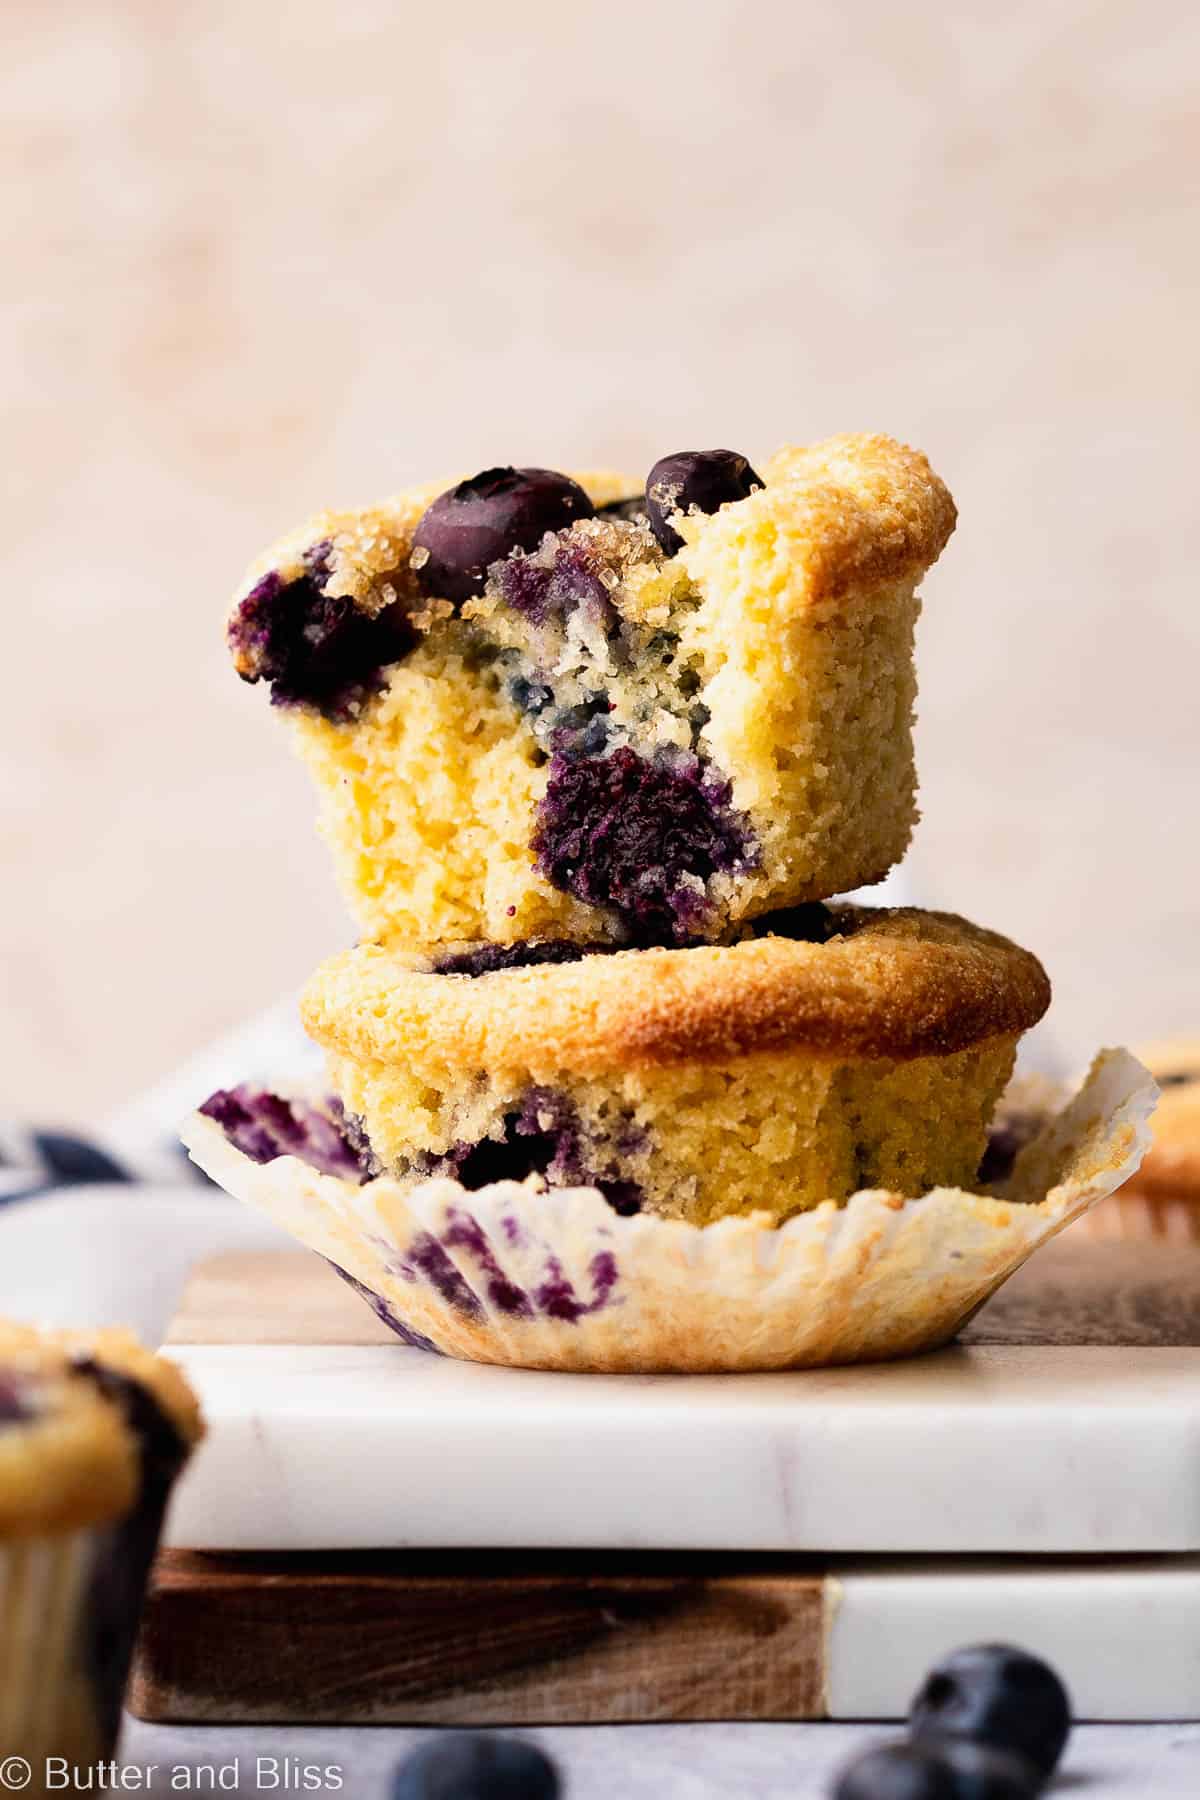 A bite shot of a fluffy gluten free blueberry muffin revealing tons of blueberries.